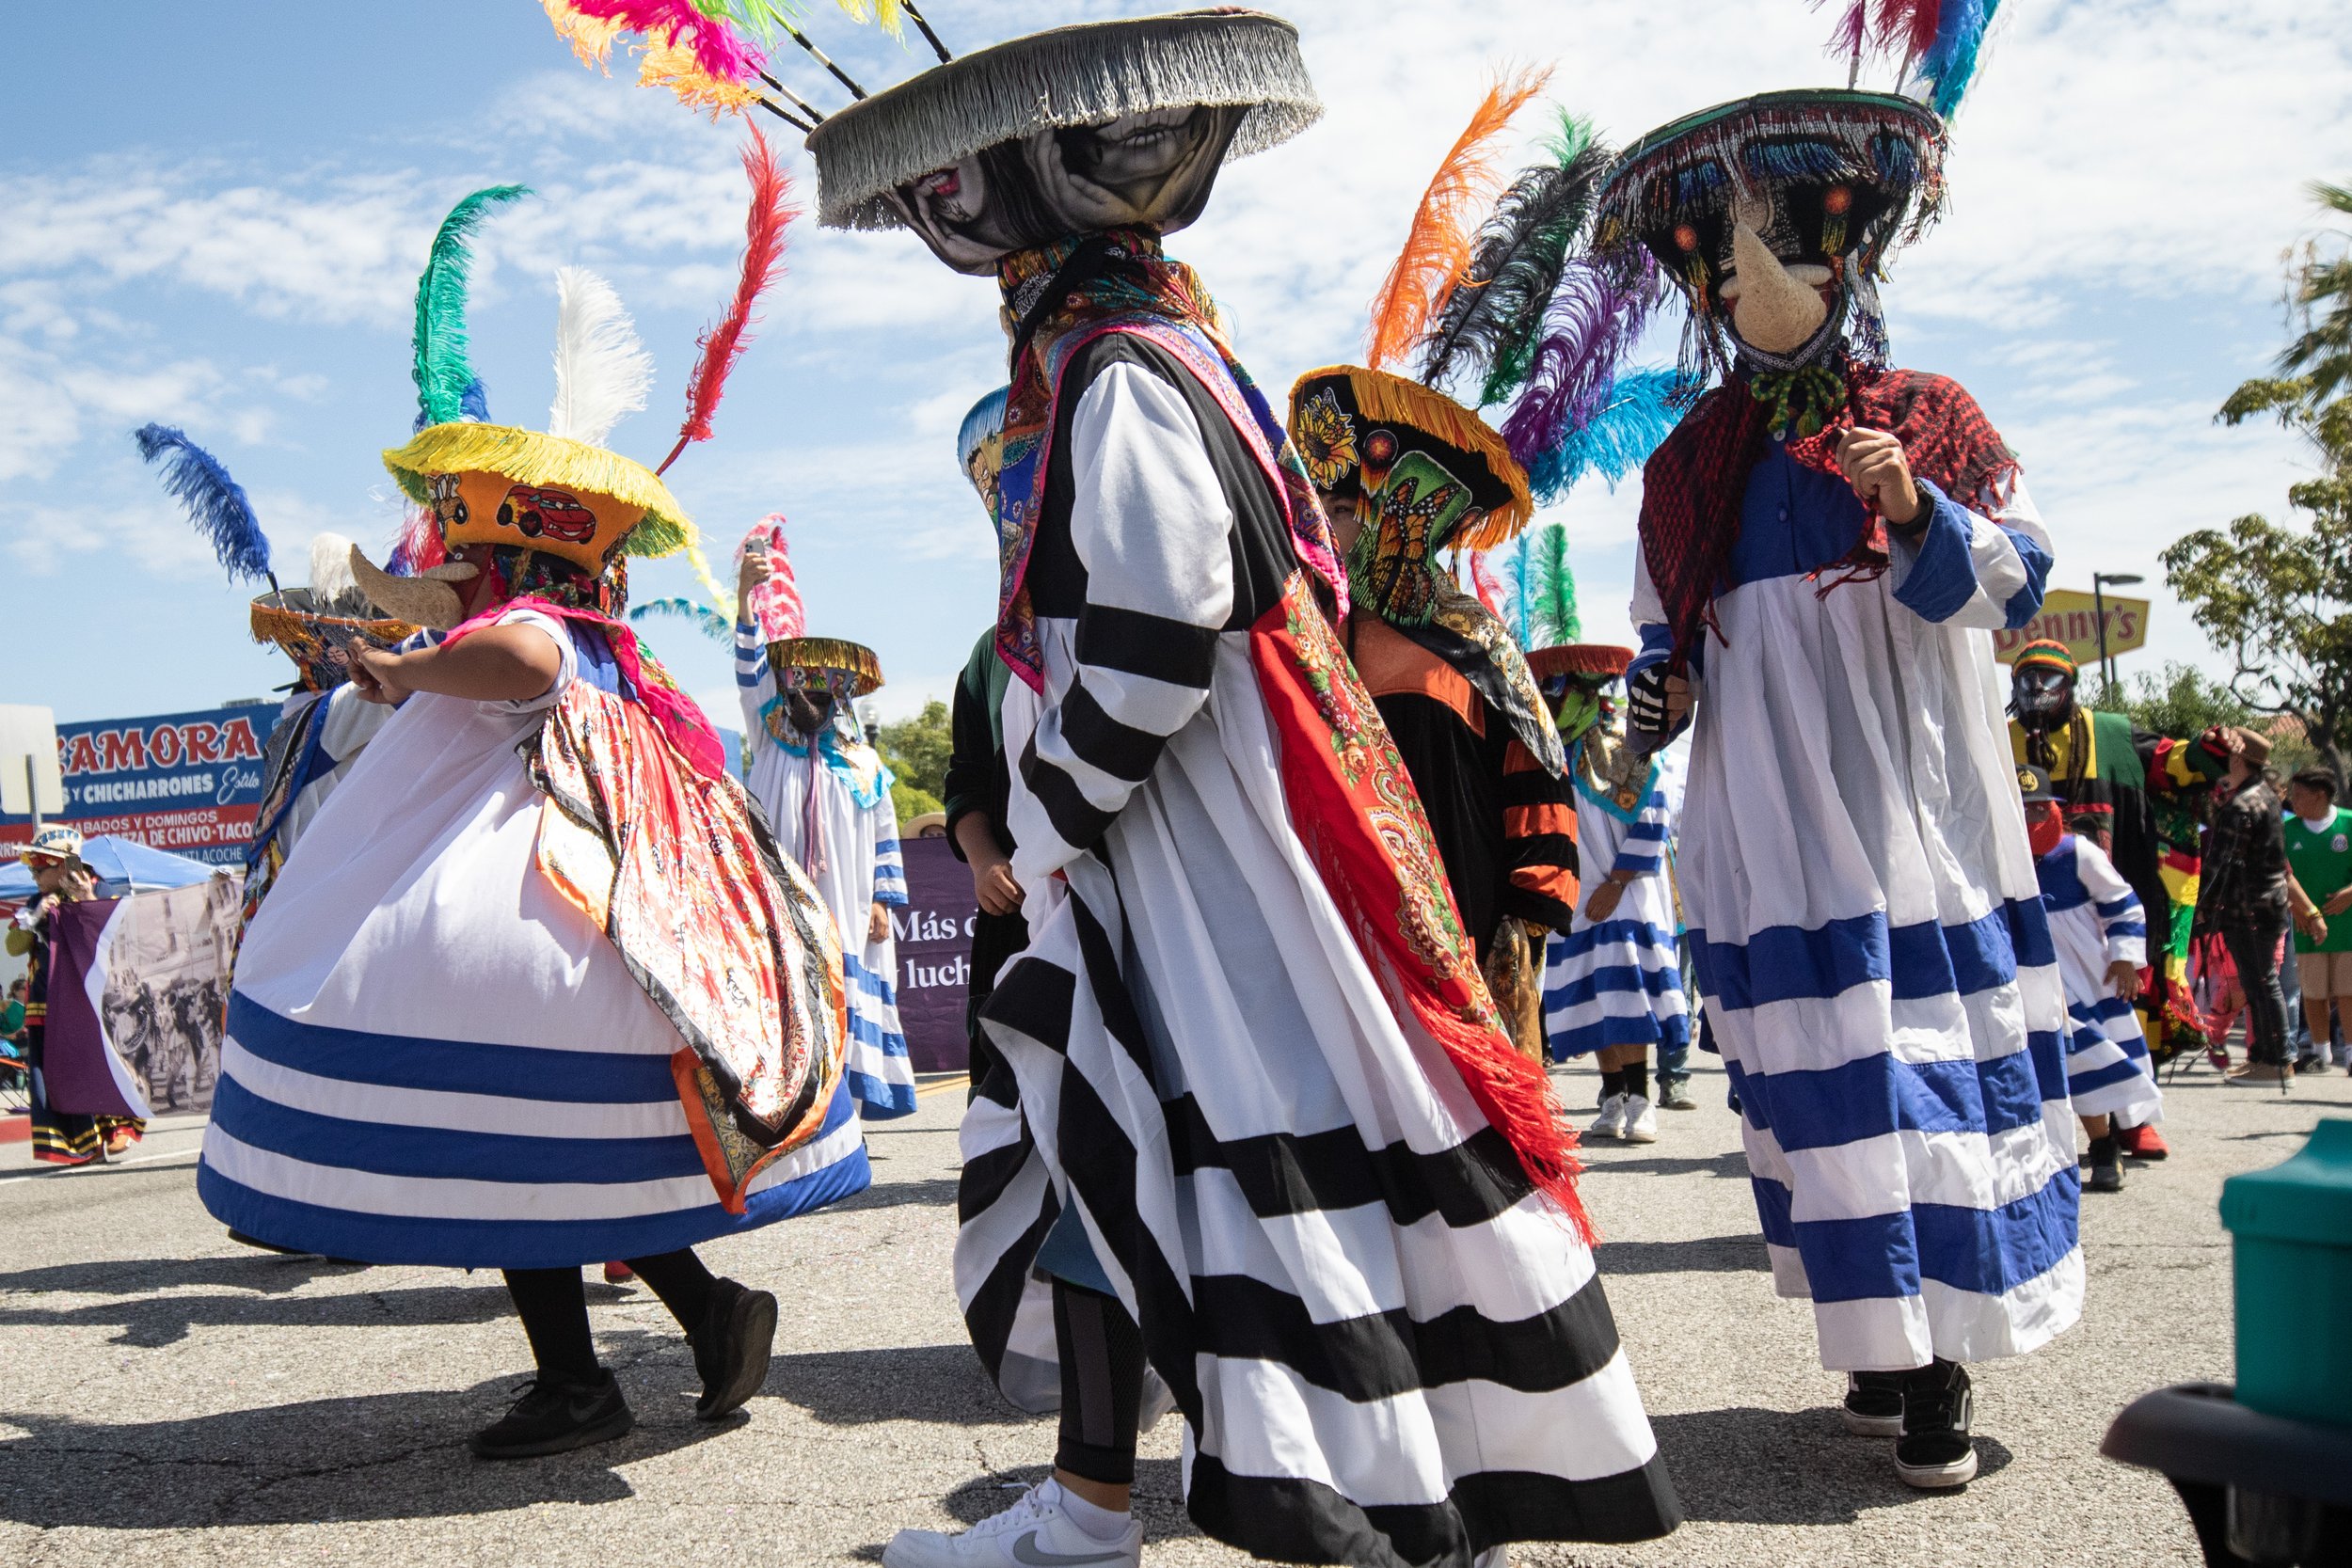  Chinelos are a kind of traditional costumed dancer which is popular in the Mexican state of Morelos. It developed as the result of a blending of indigenous and Catholic traditions, the masks being a mockery of European customs. They are shown here a